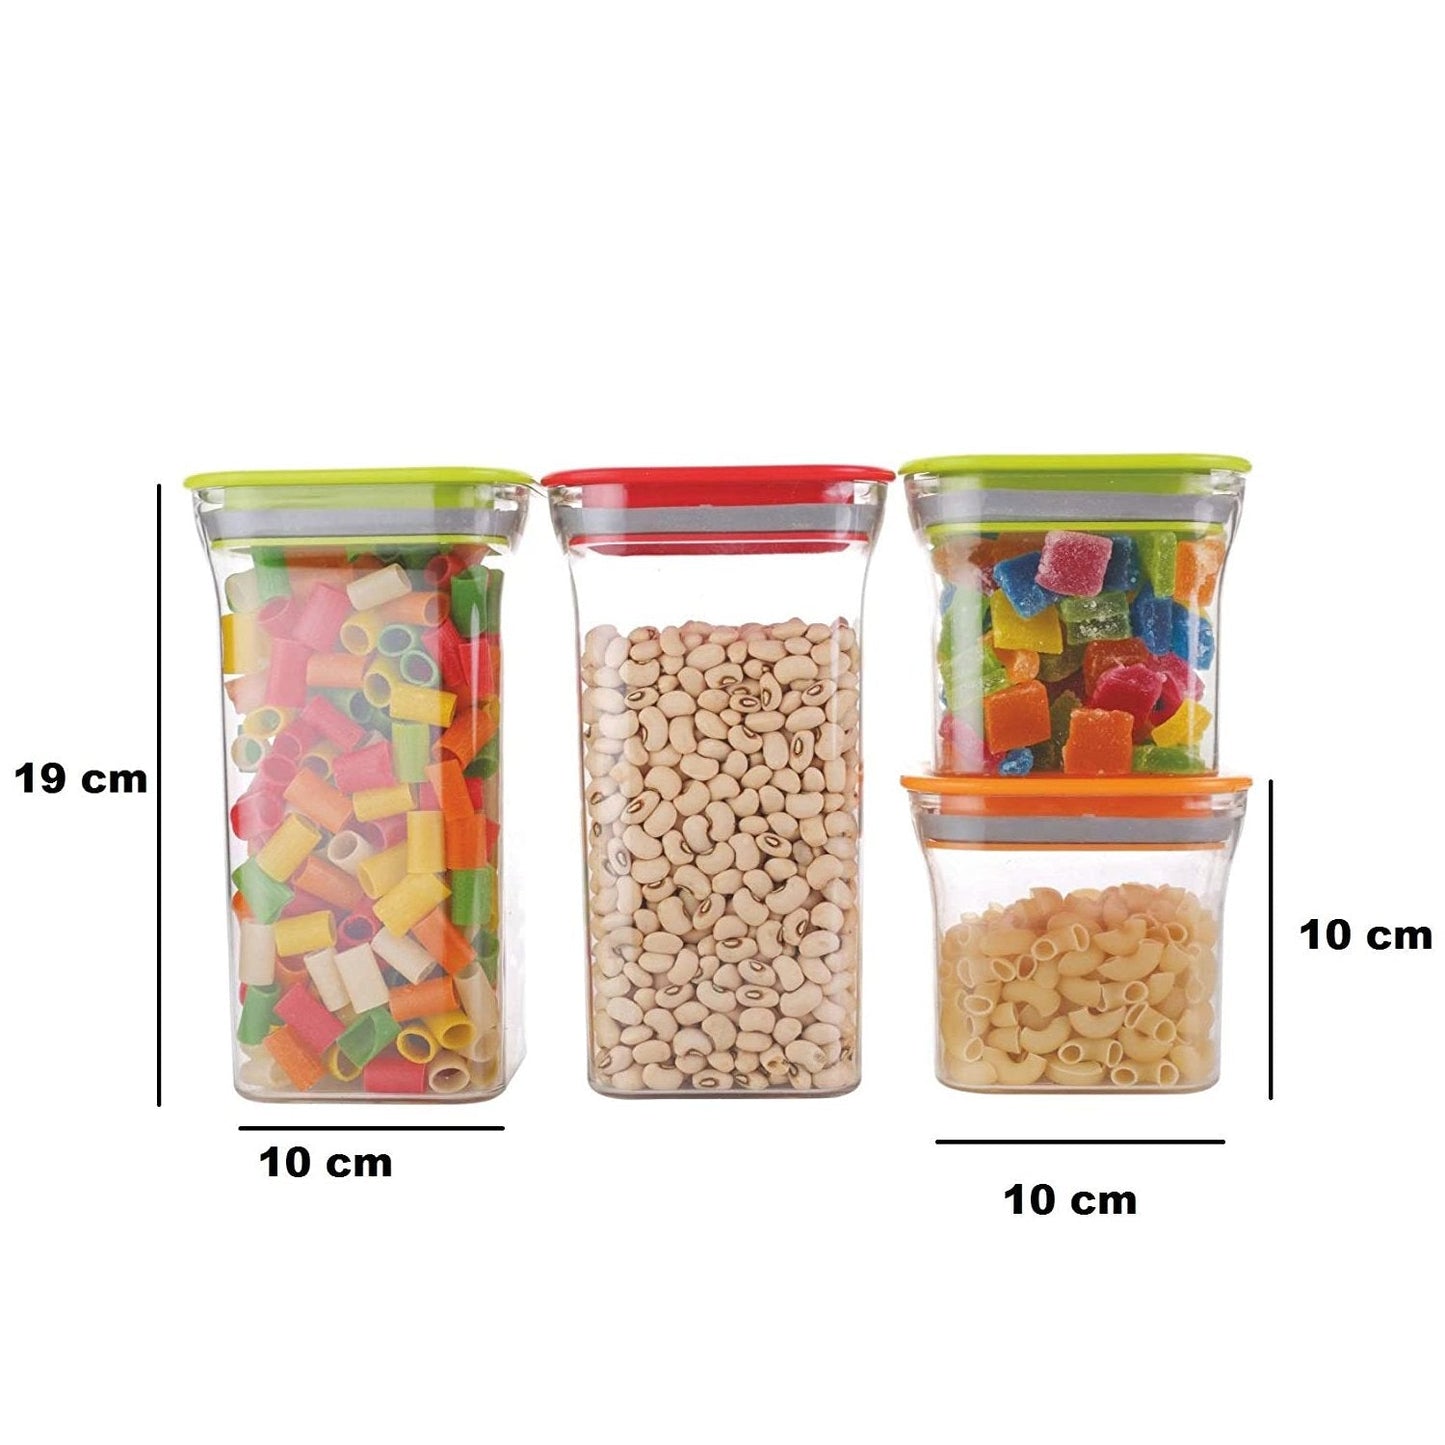 Kitkat Storage container with Opening Mouth 4pcs Set